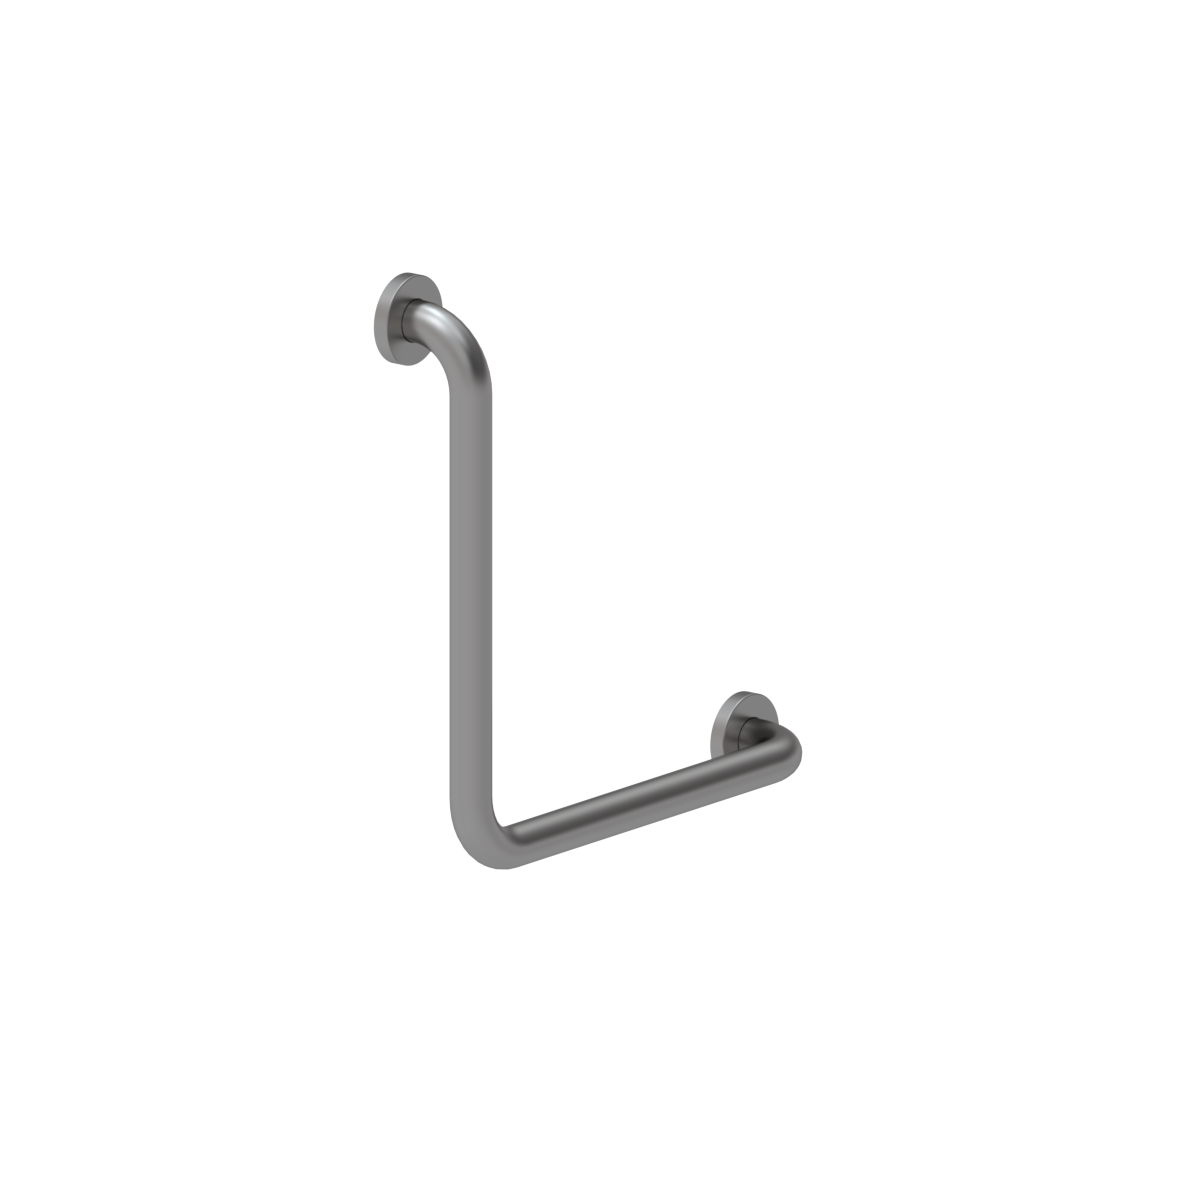 Inox Care Grab rail, 90°, left and right, 400 x 400 mm, Stainless steel